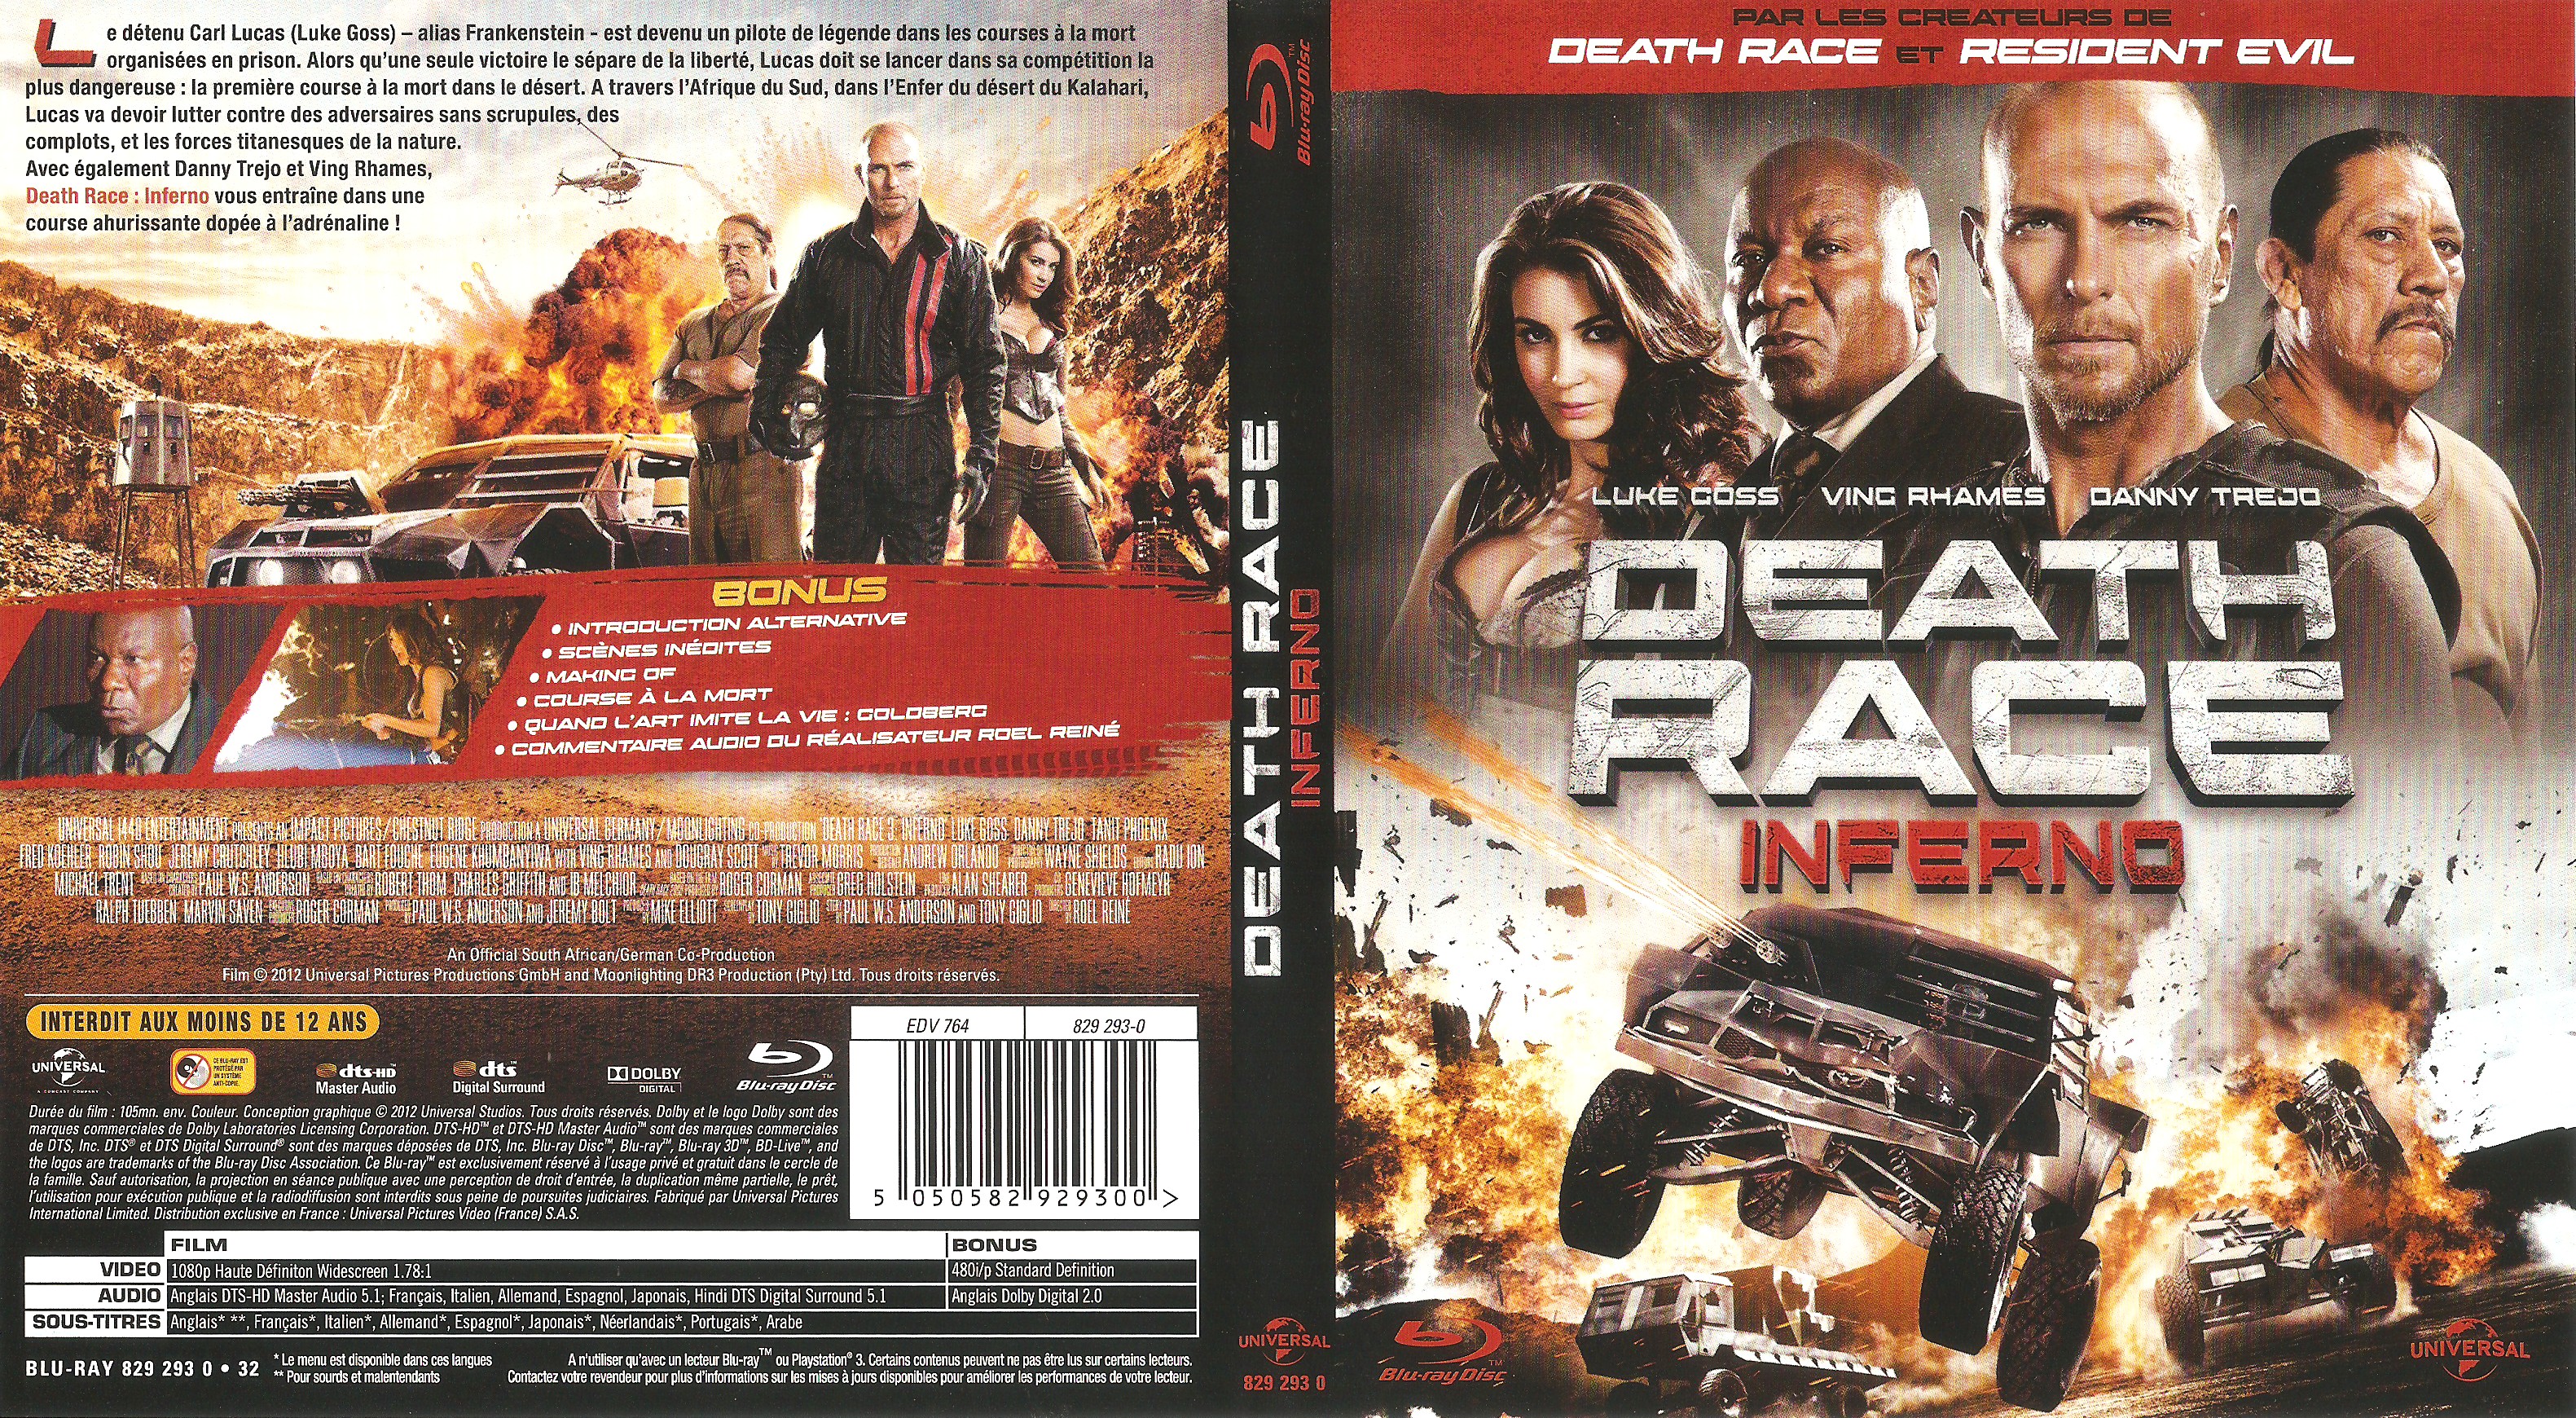 Jaquette DVD Death Race 3 Inferno (BLU-RAY)